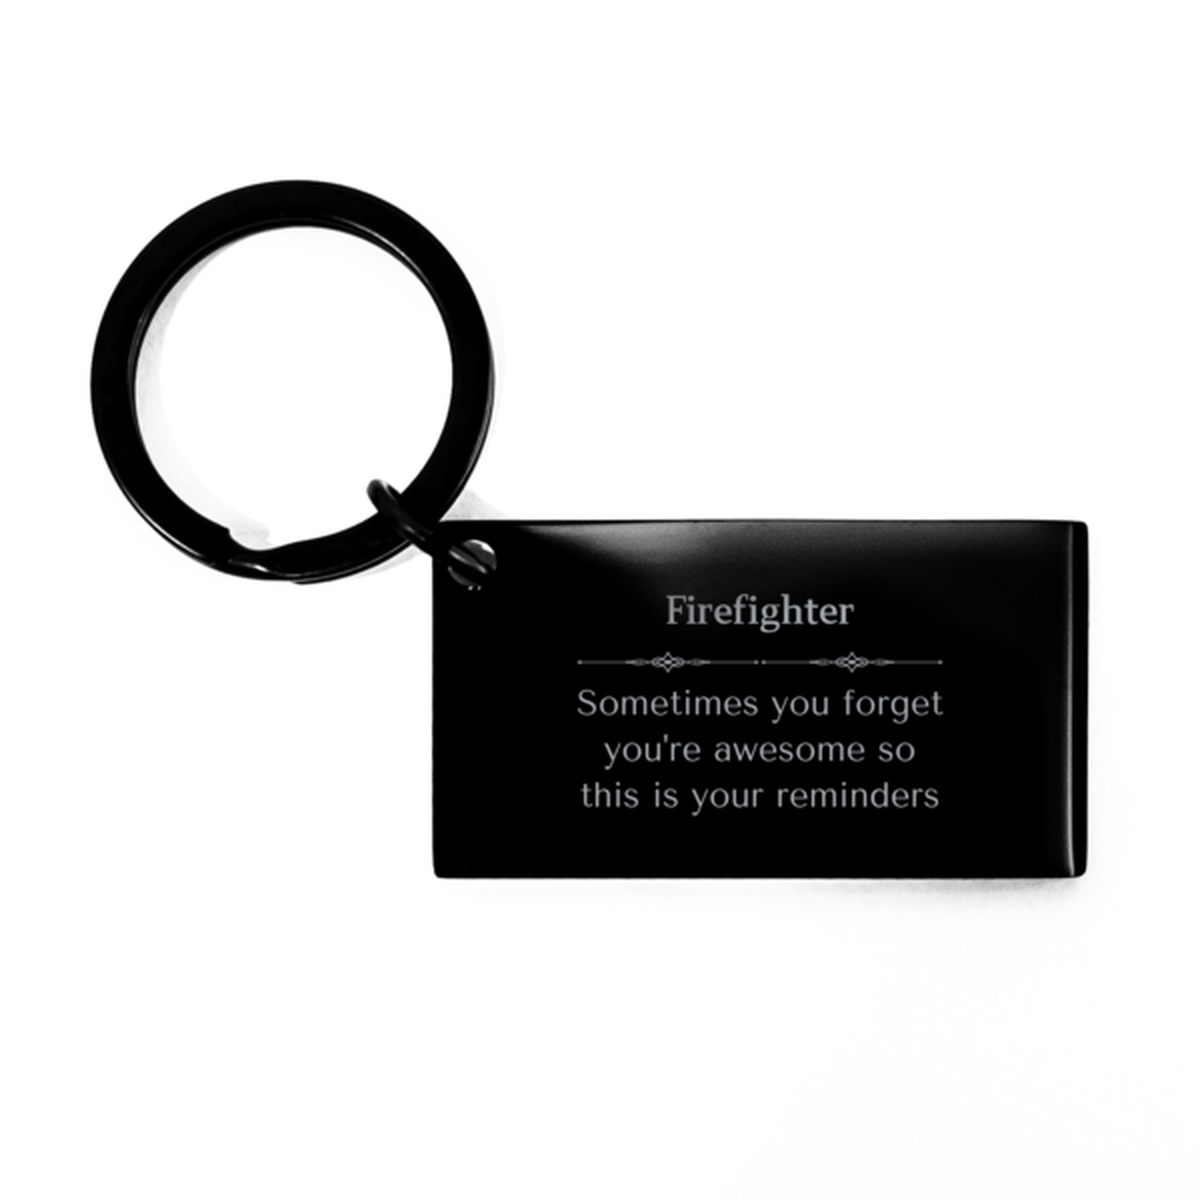 Sentimental Firefighter Keychain, Lawyer Sometimes you forget you're awesome so this is your reminders, Graduation Christmas Birthday Gifts for Firefighter, Men, Women, Coworkers